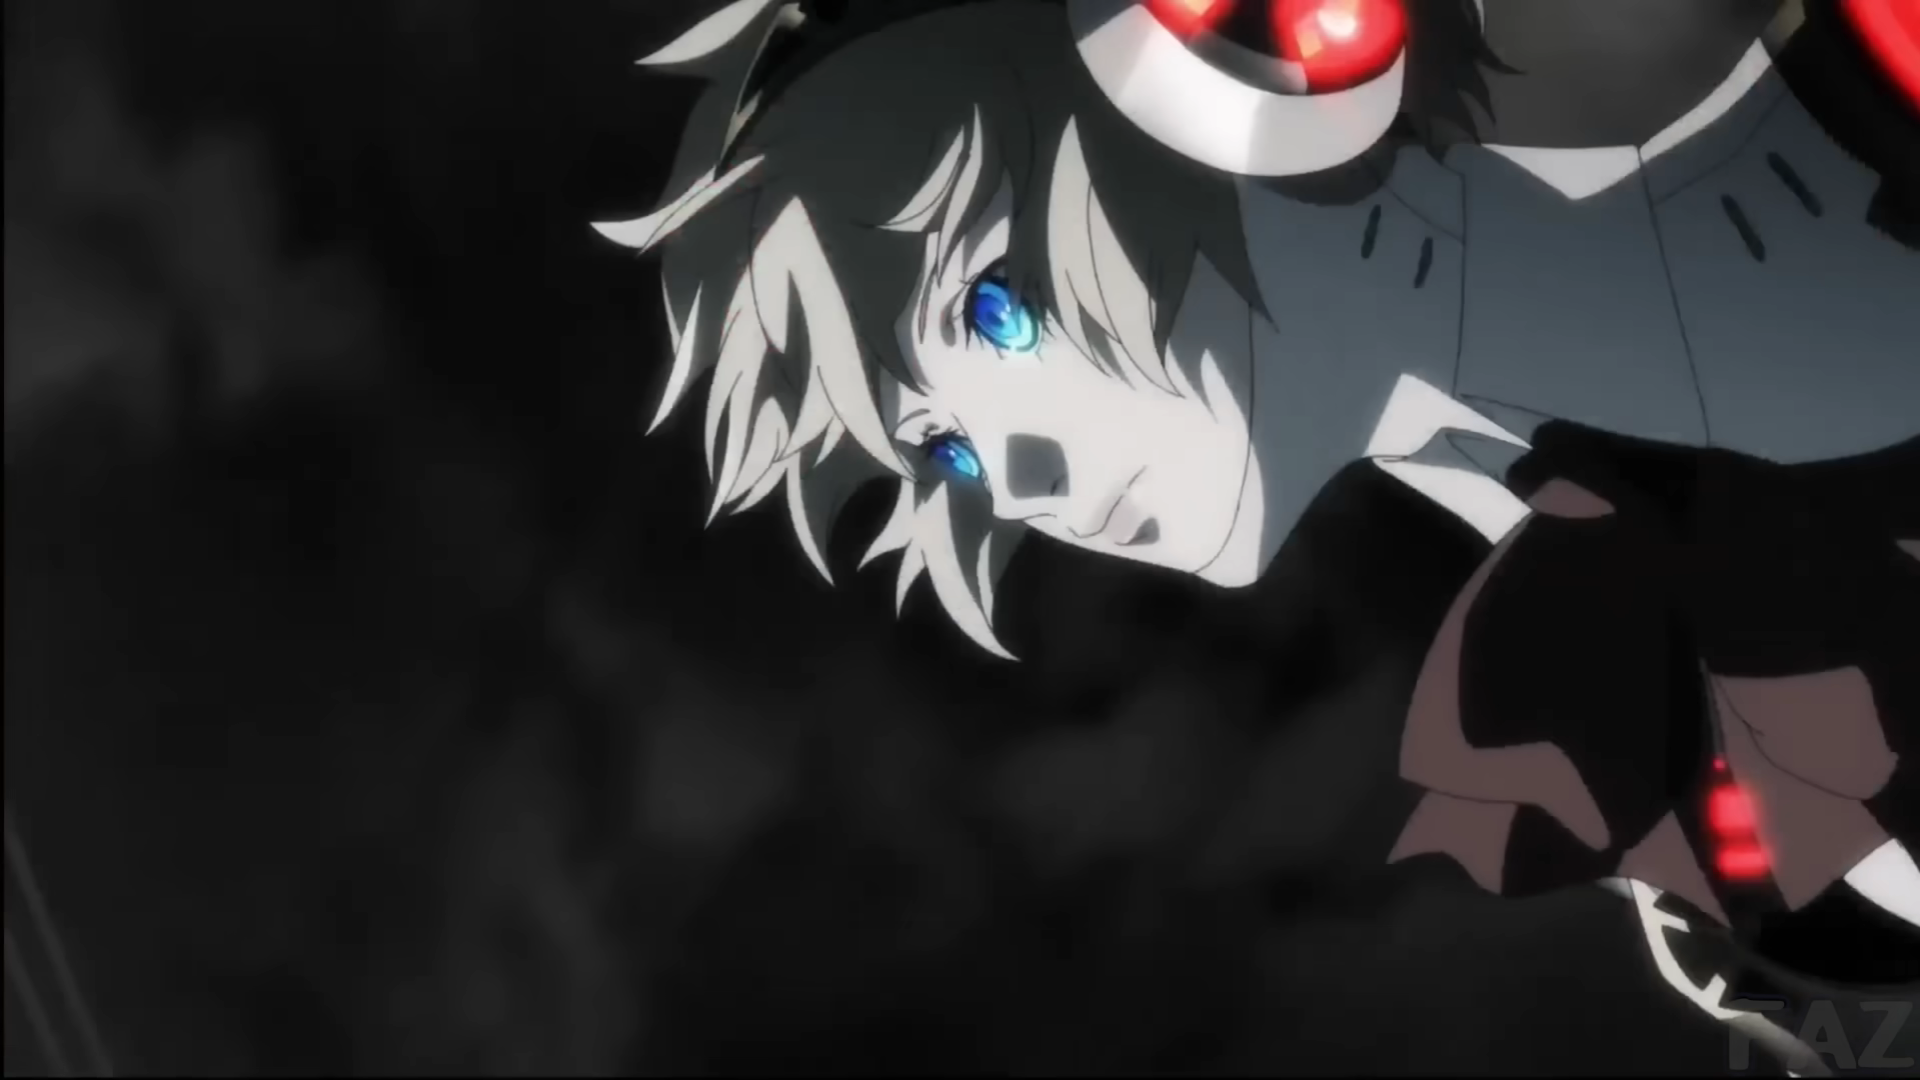 New Persona 3 Reload Trailer For the Full Moon - Anime Fire